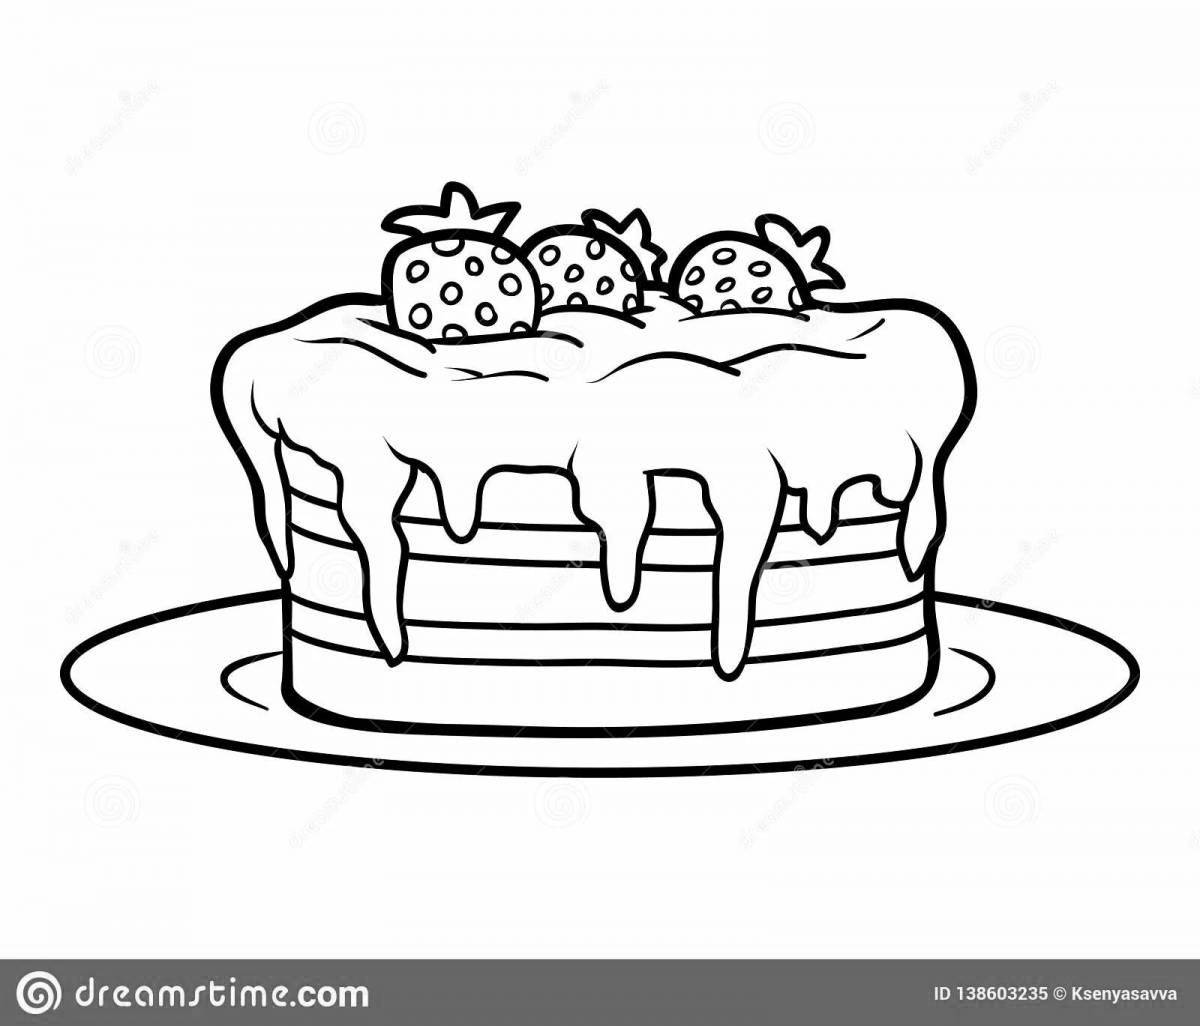 Coloring page chocolate cake with colorful filling